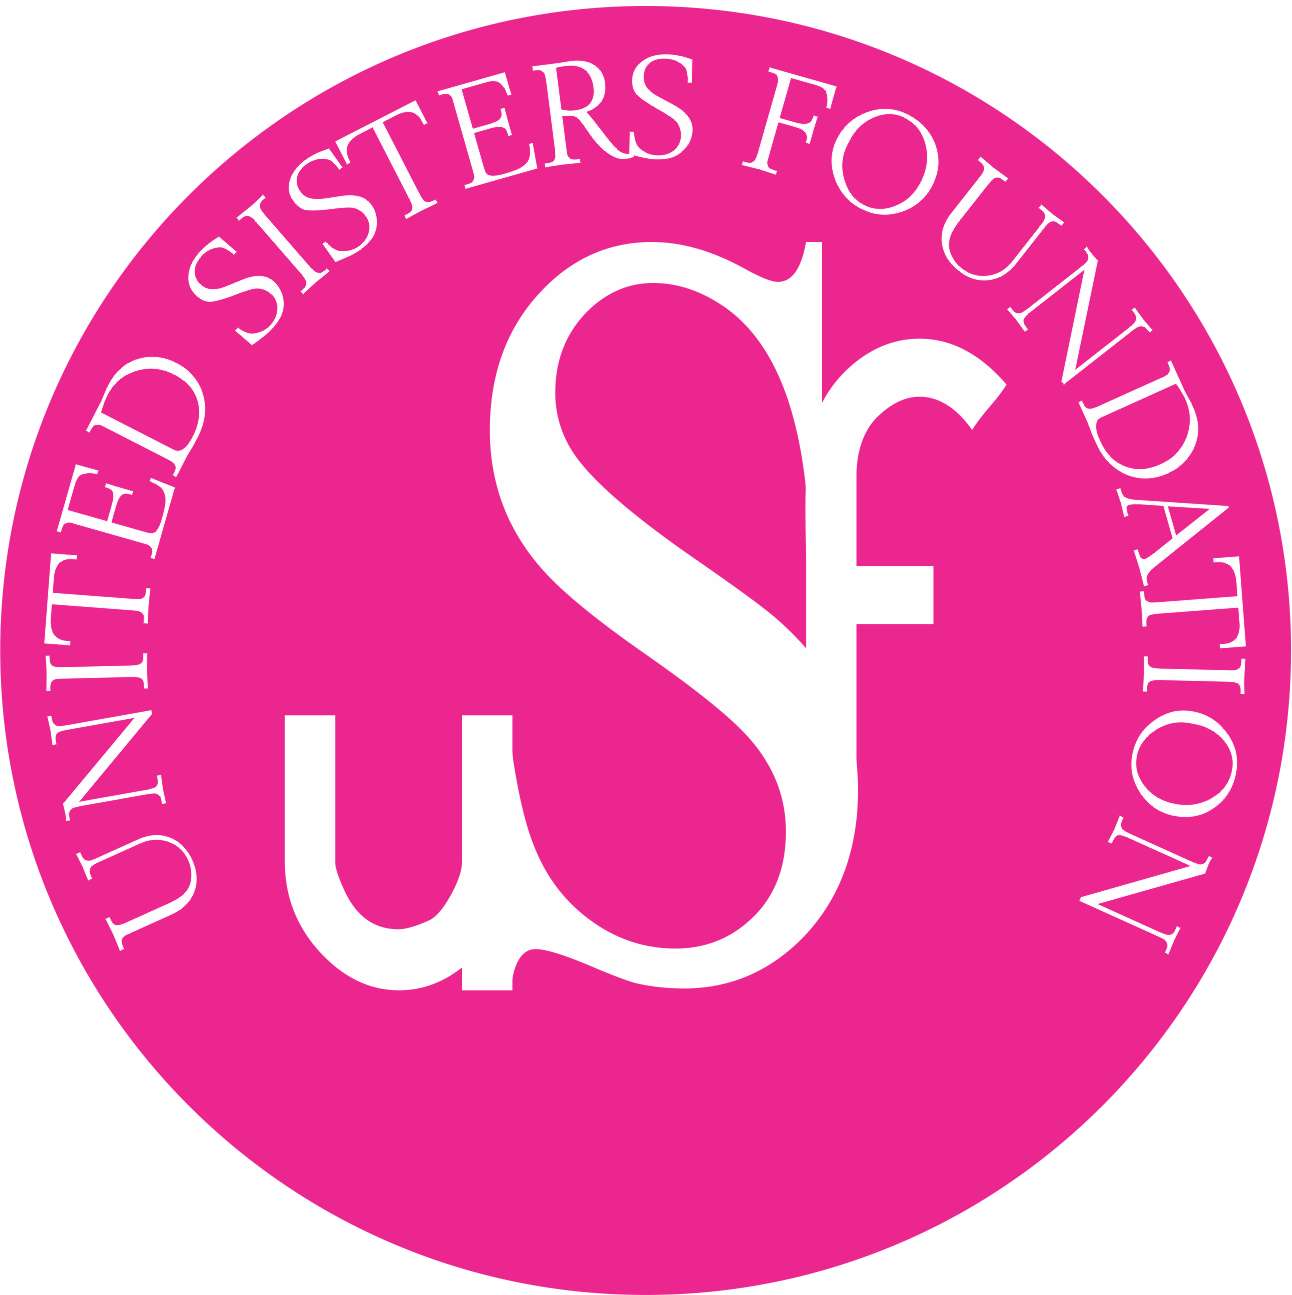 United Sisters Foundation